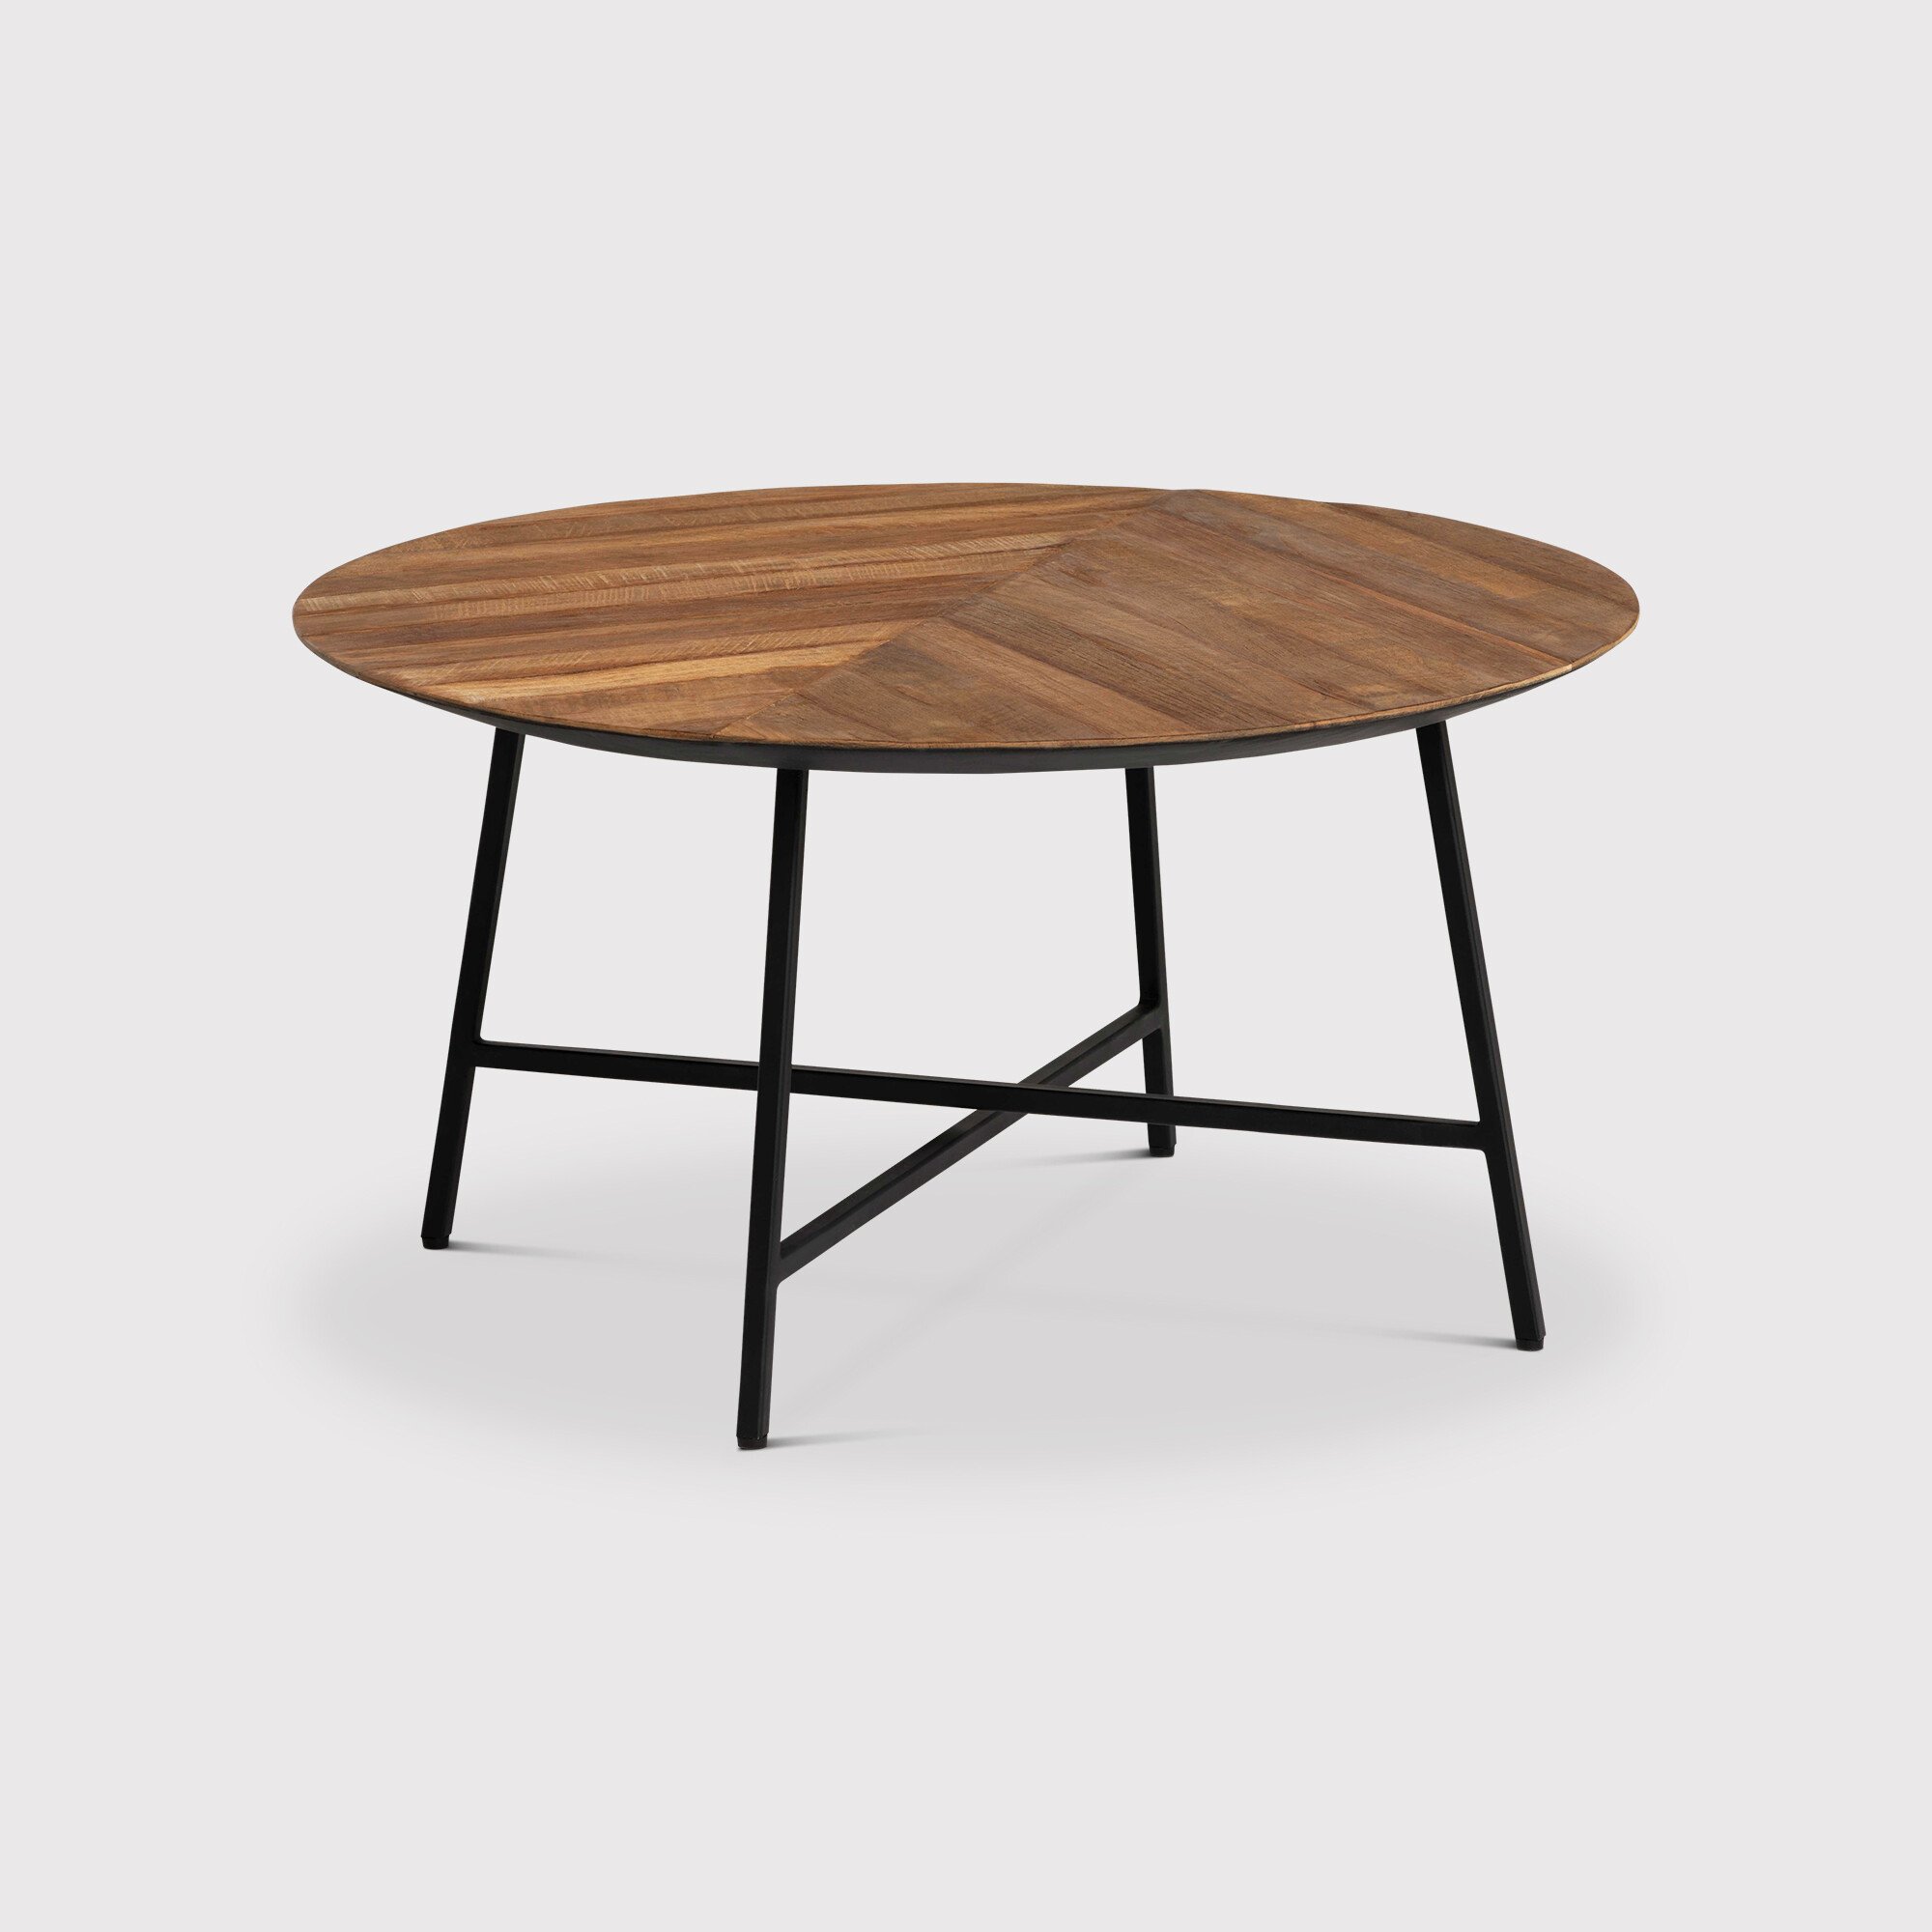 Brixton Coffee Table, Round, Brown | Barker & Stonehouse